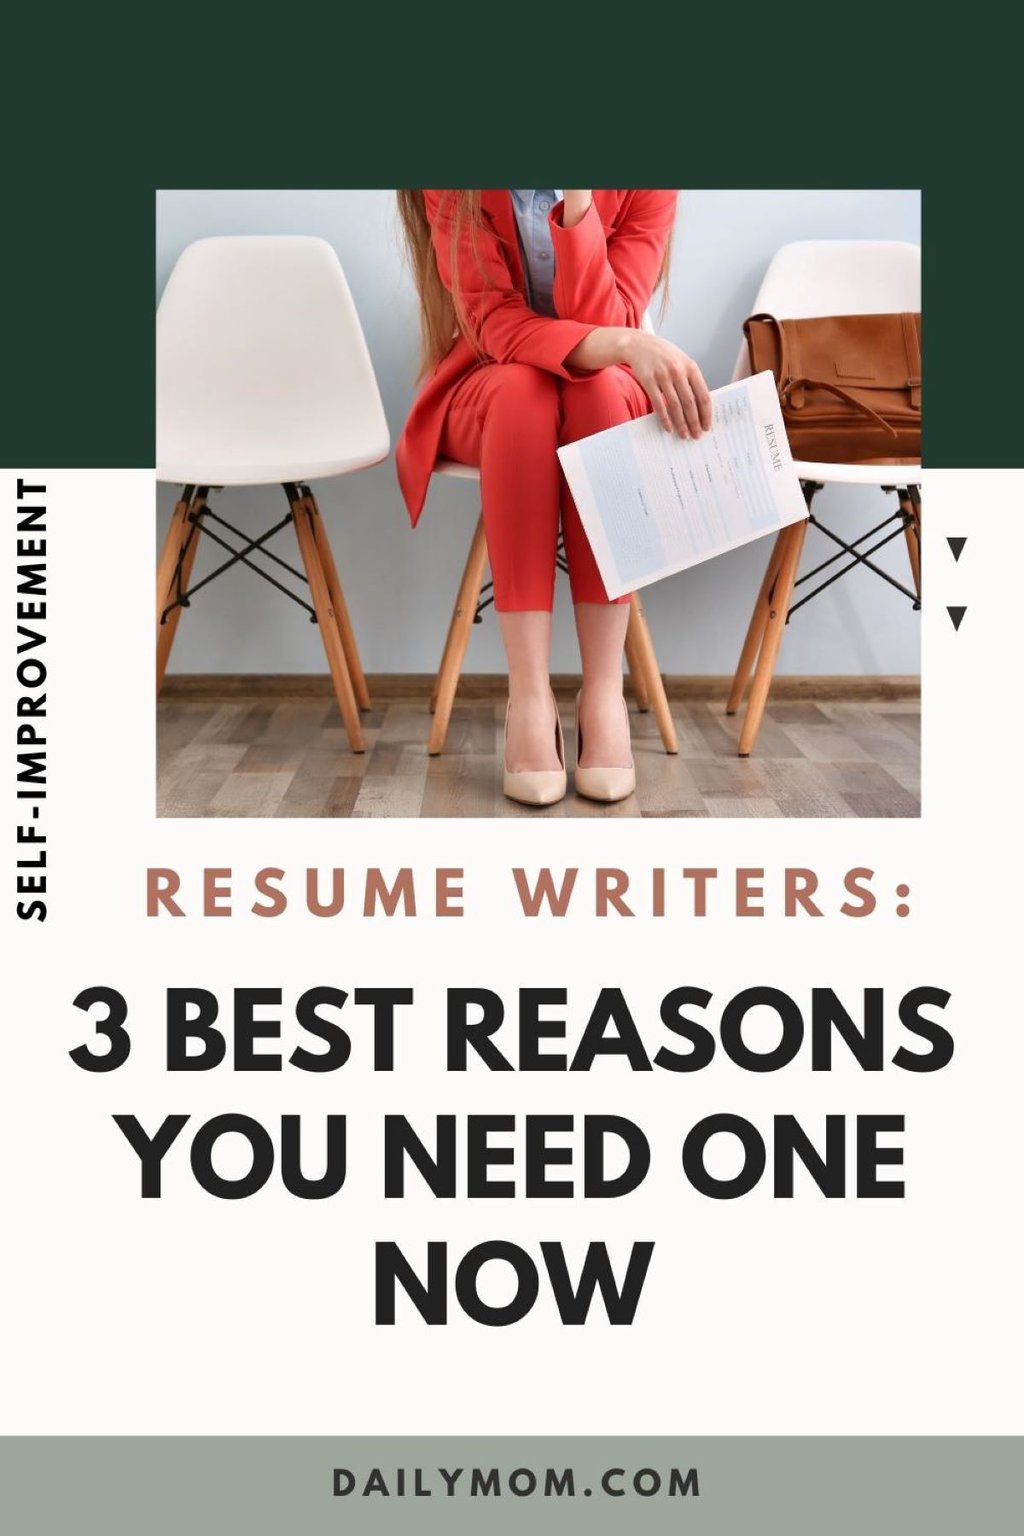 Resume Writers: 3 Best Reasons You Need One Now